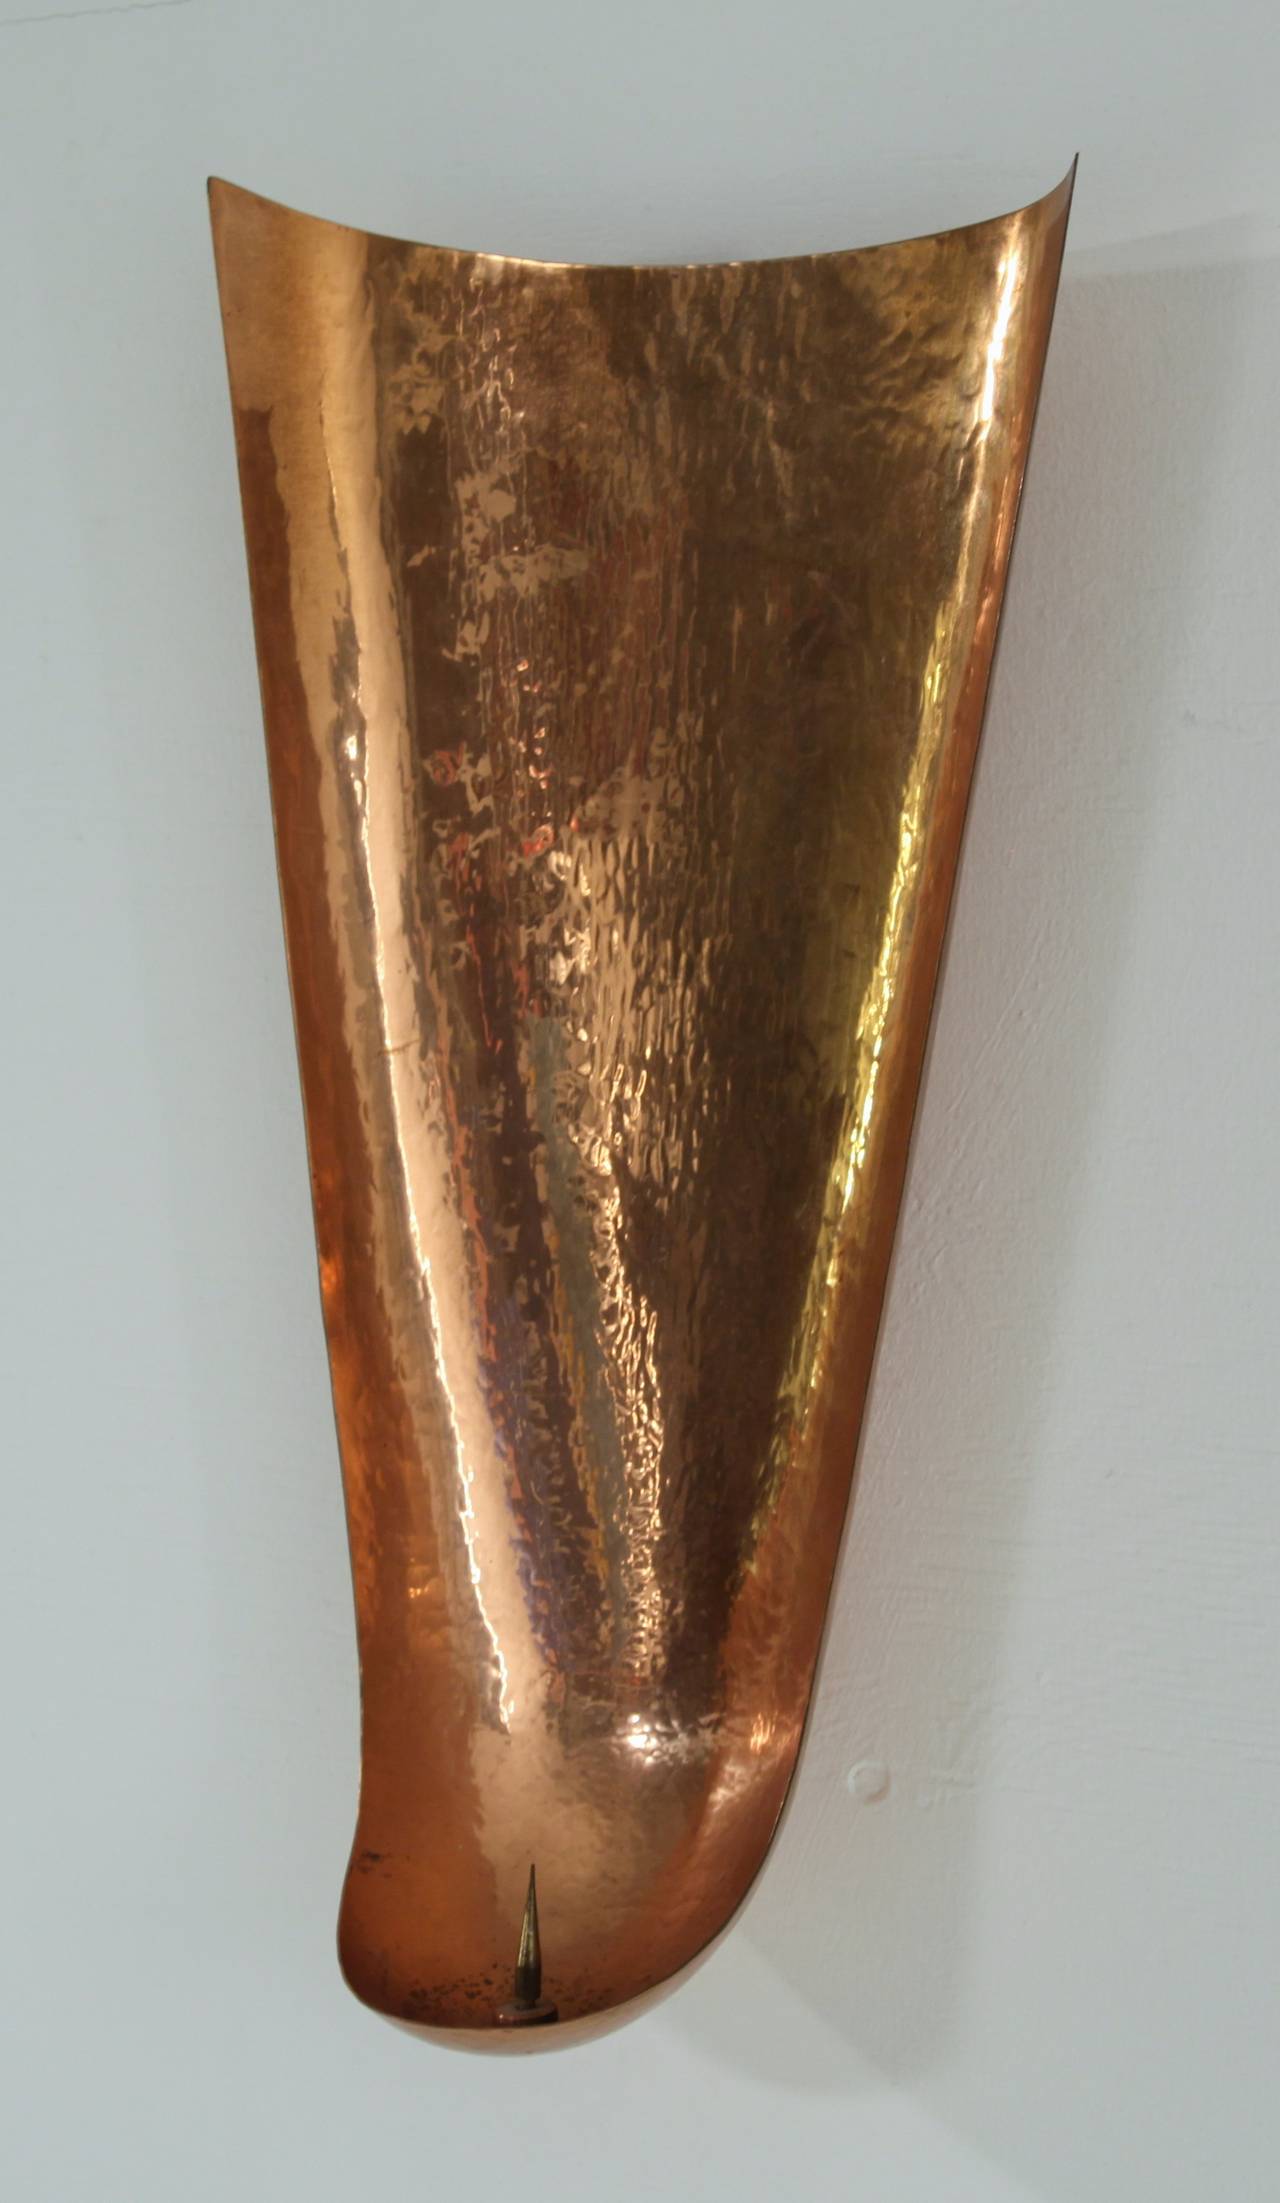 A superb candleholder made of hand-hammered copper. The large concave holder gives a beautiful light reflection and can be mounted to the wall very easily.
